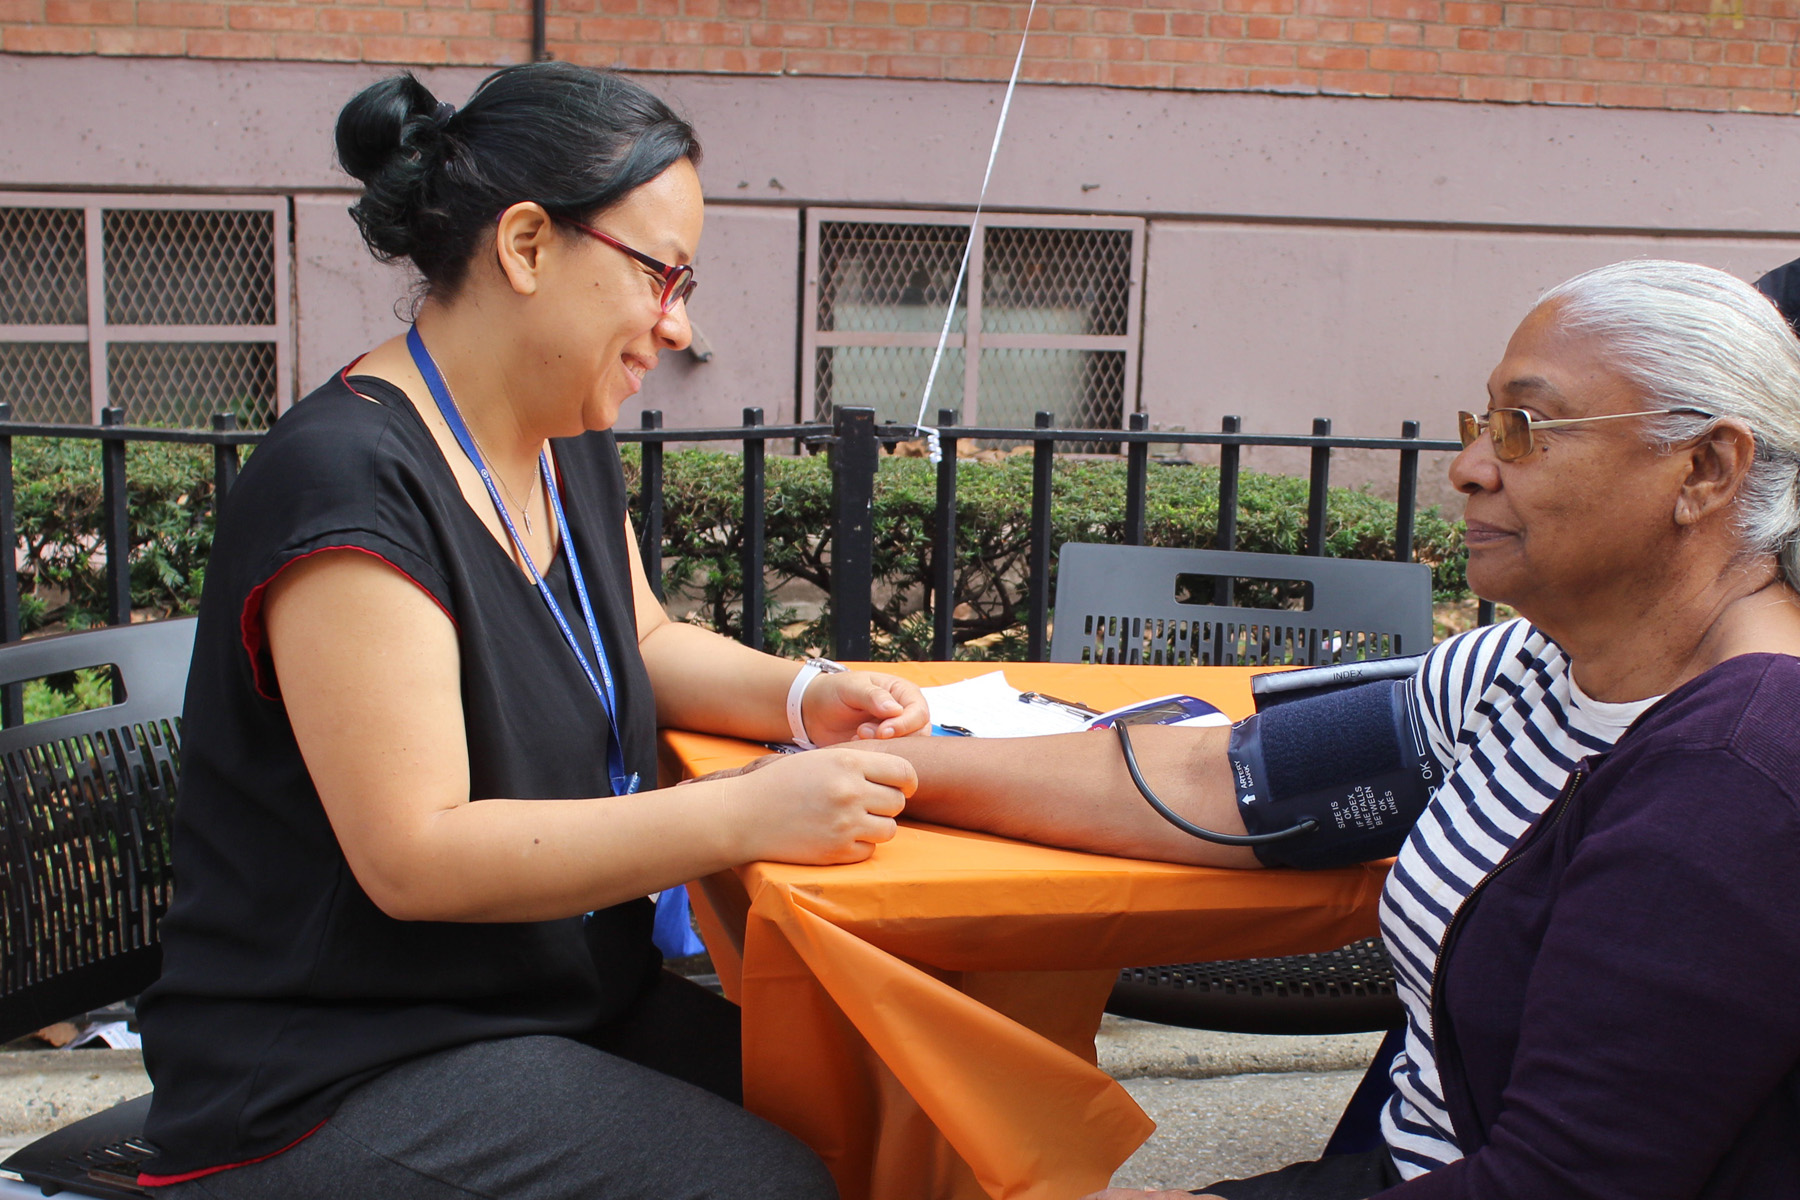 Woman gets her blood pressure taken at outdoor health fair for seniors